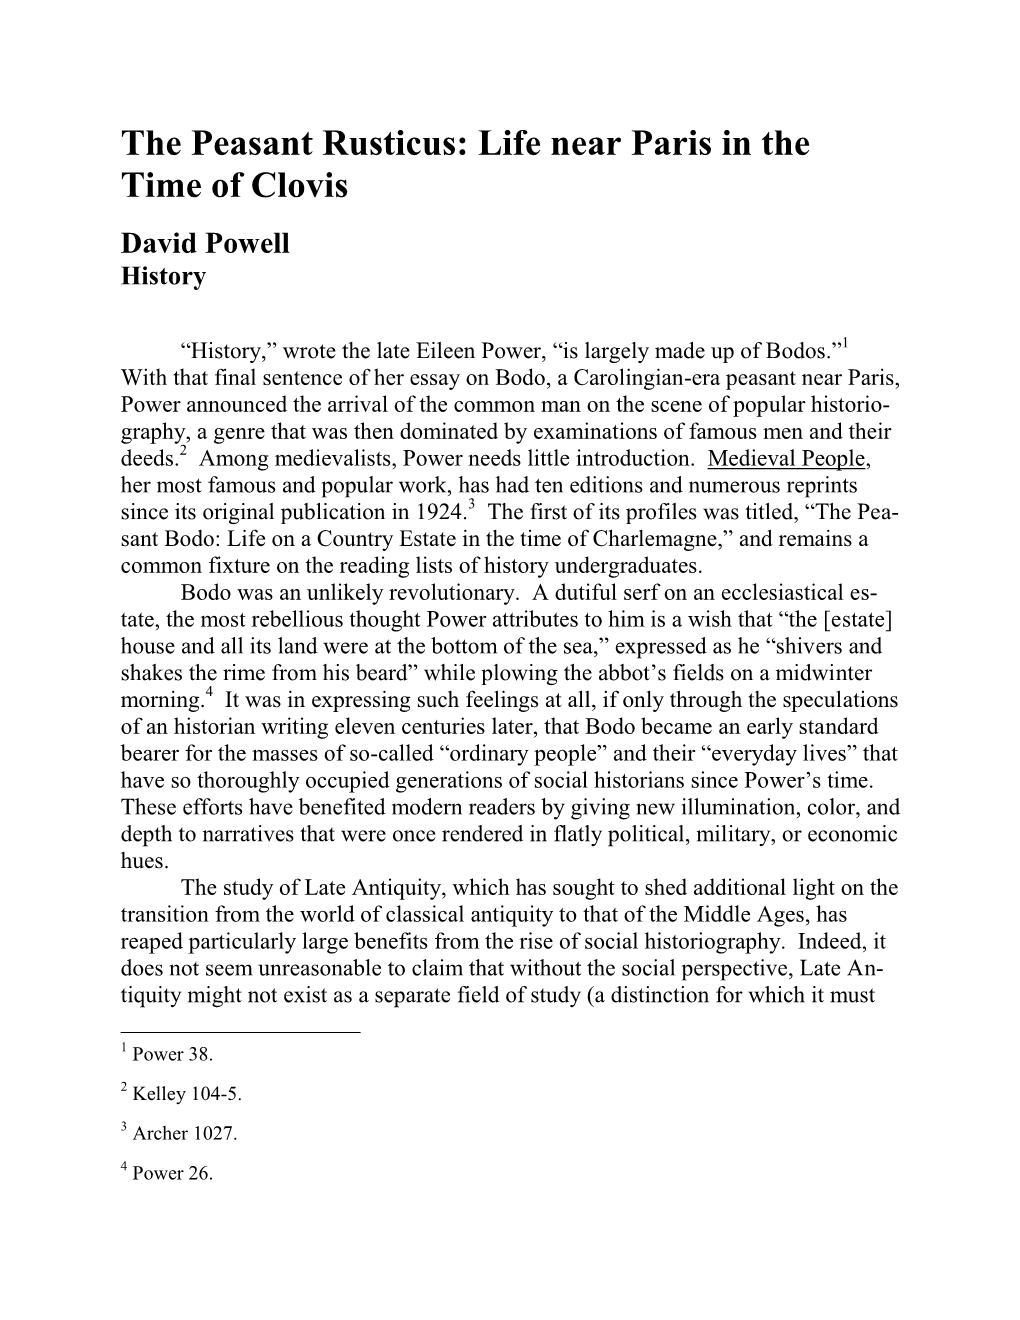 The Peasant Rusticus: Life Near Paris in the Time of Clovis David Powell History